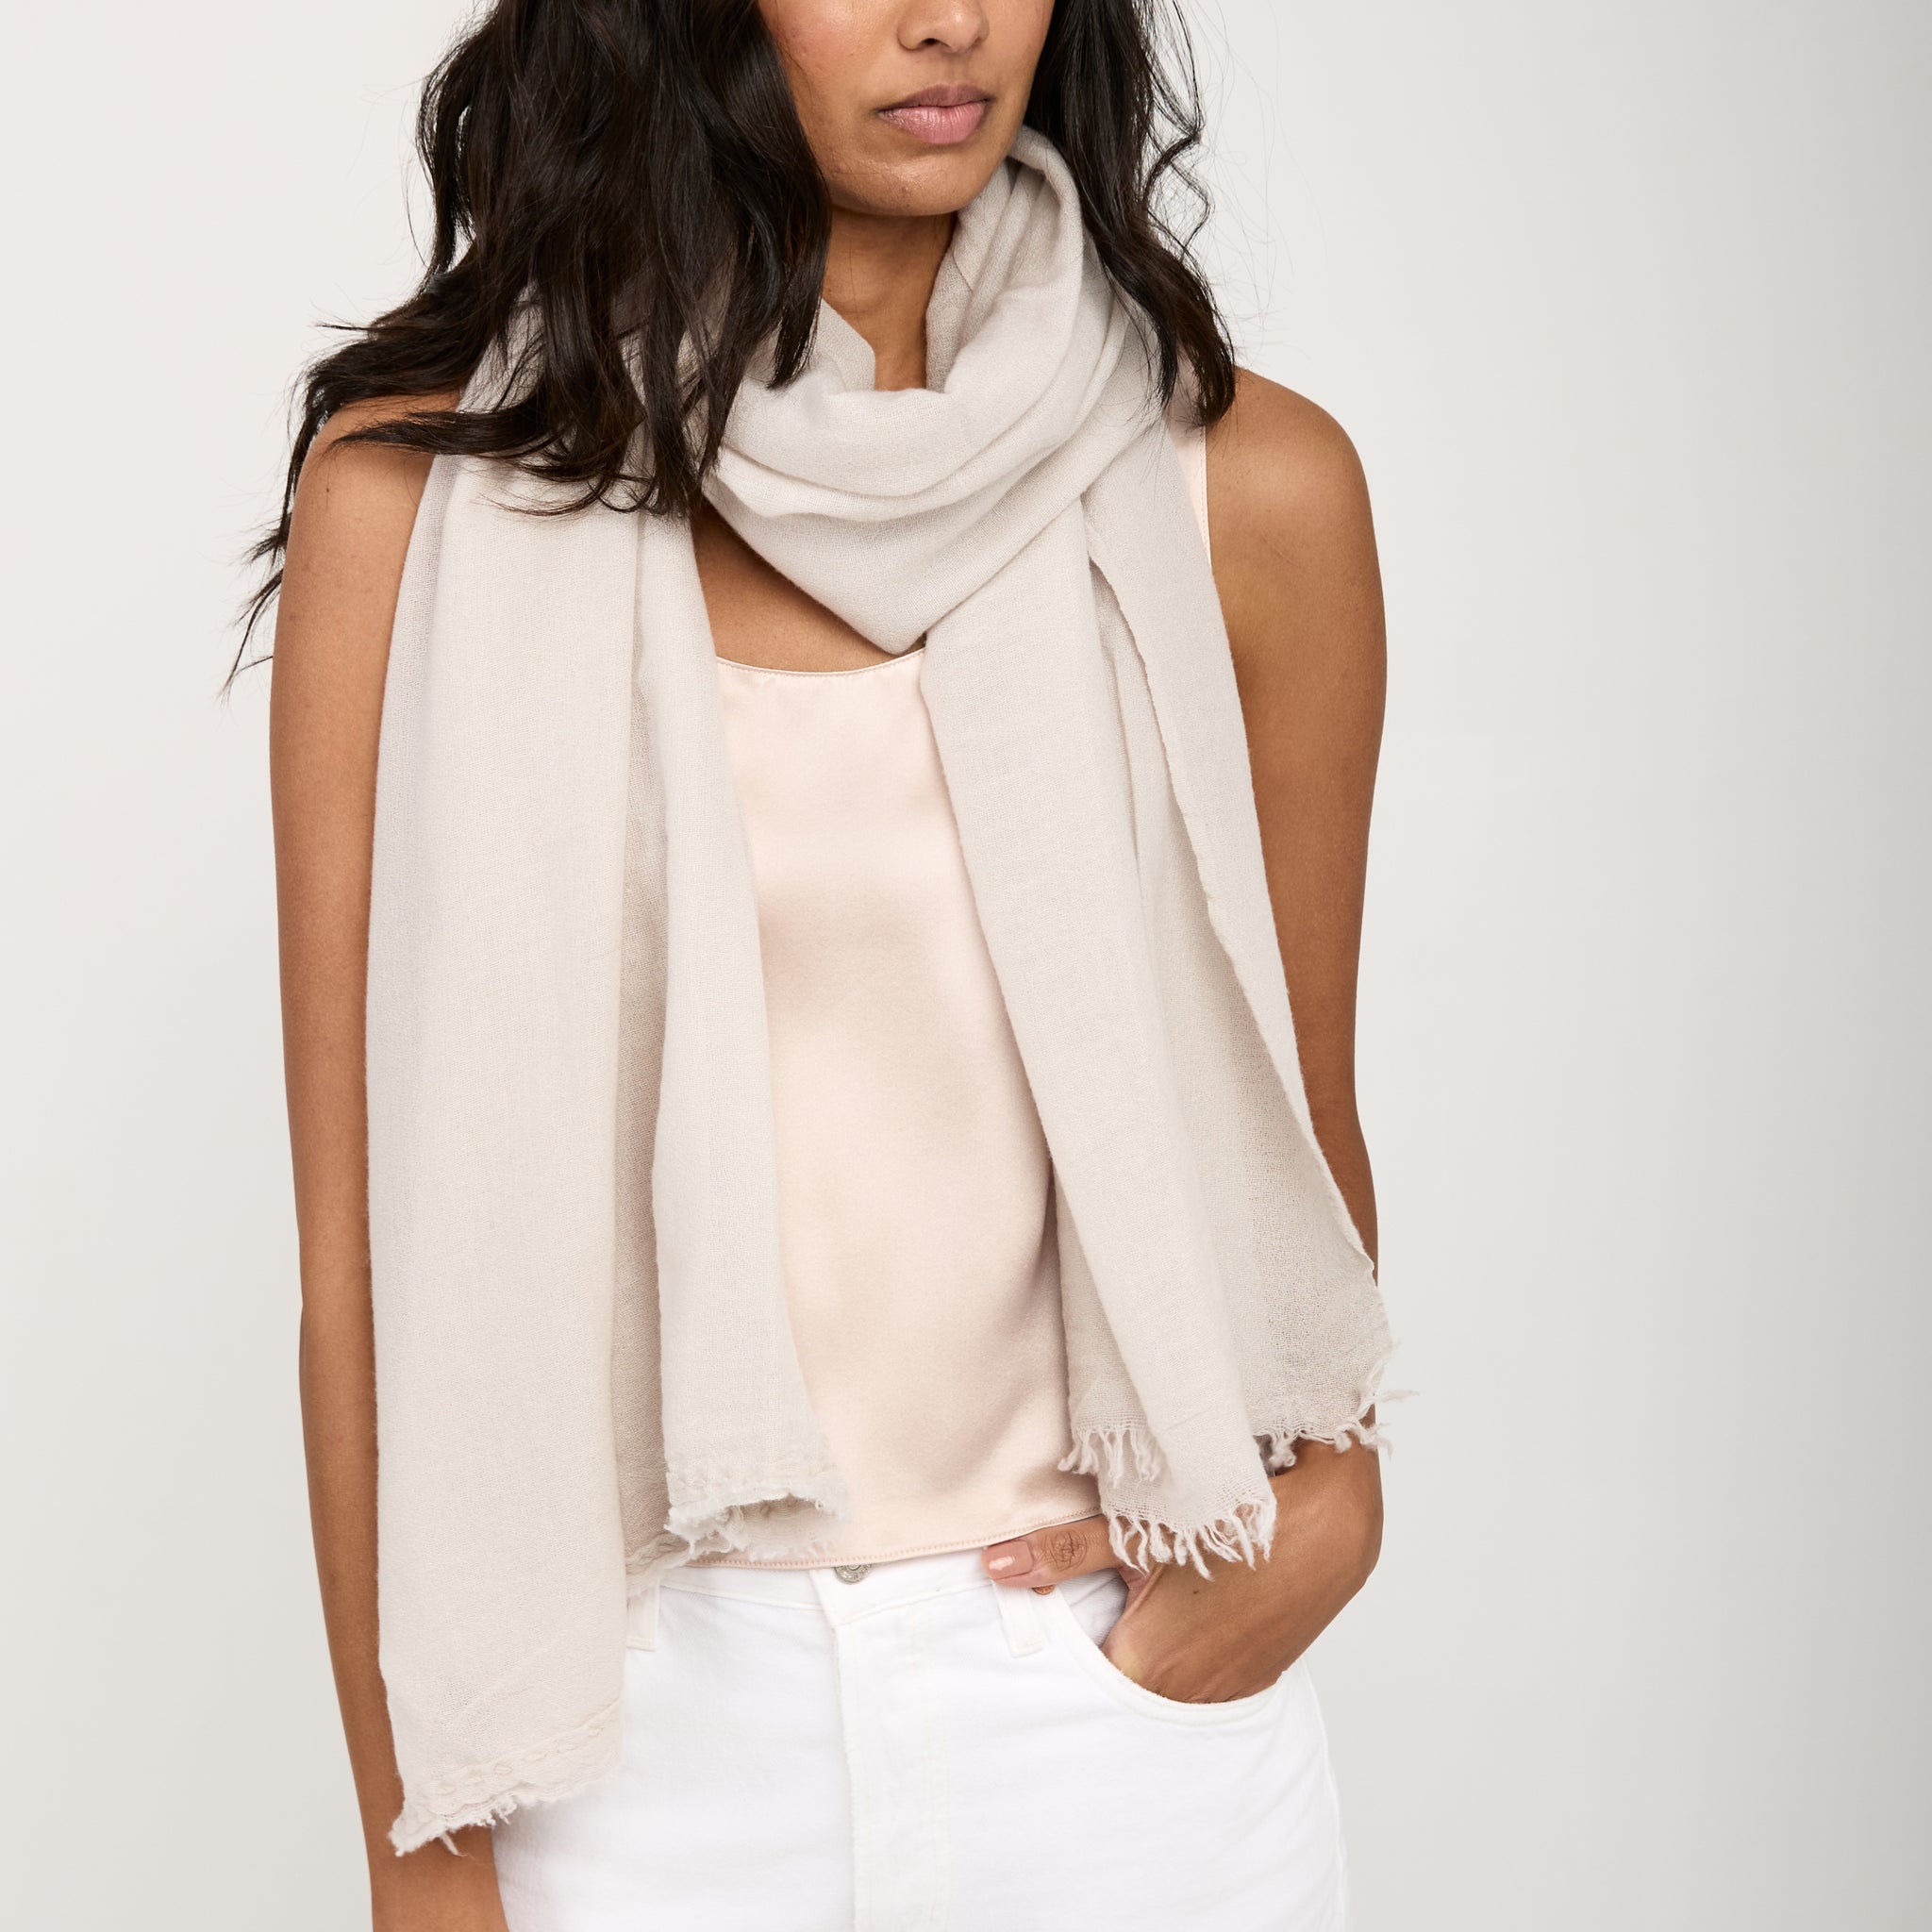 PRIVATE 0204 Net Cashmere Scarf in Sable